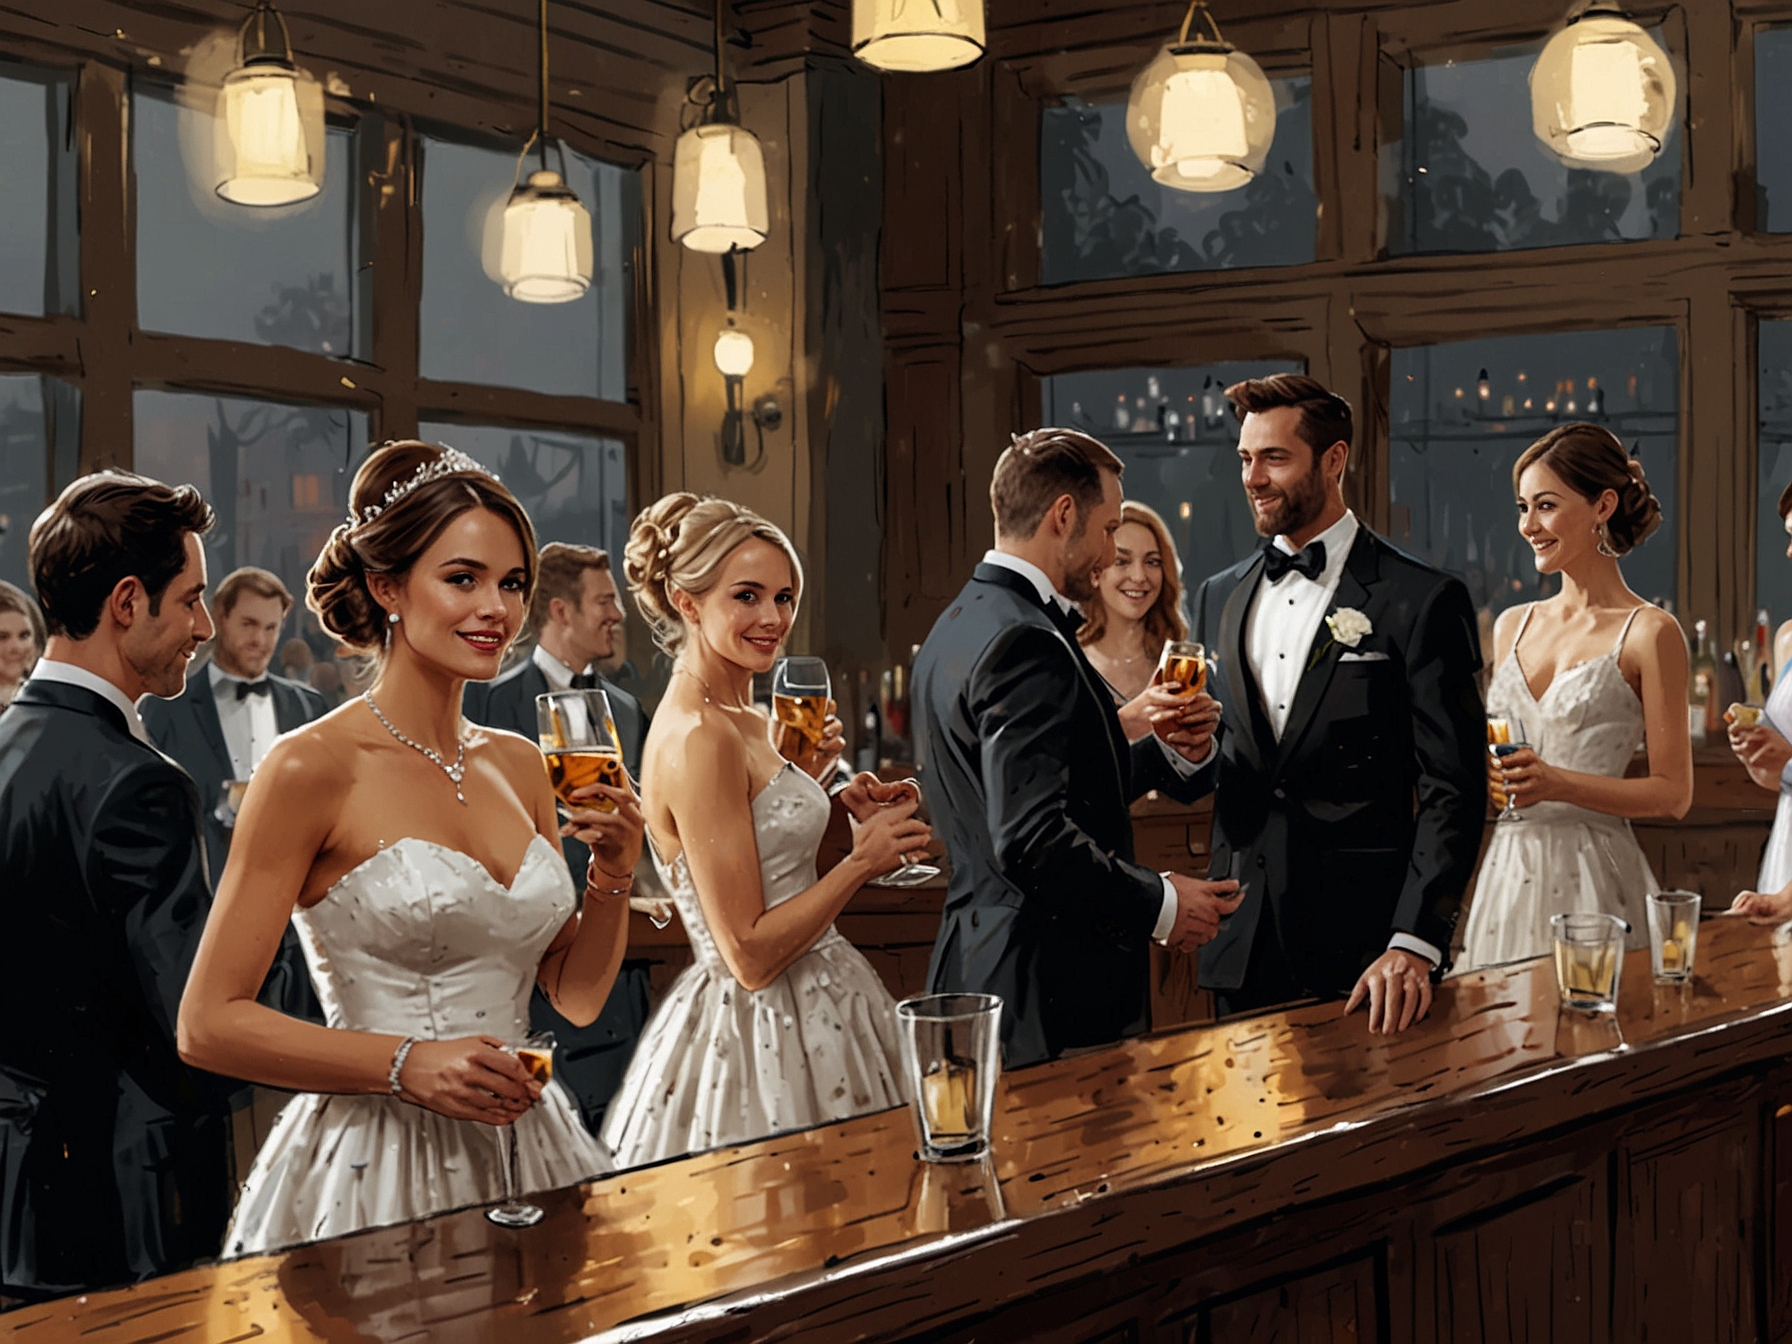 Illustration of a wedding reception where guests queue up at a bar to exchange drink tickets for their beverages, reflecting the bride's control over alcohol consumption.